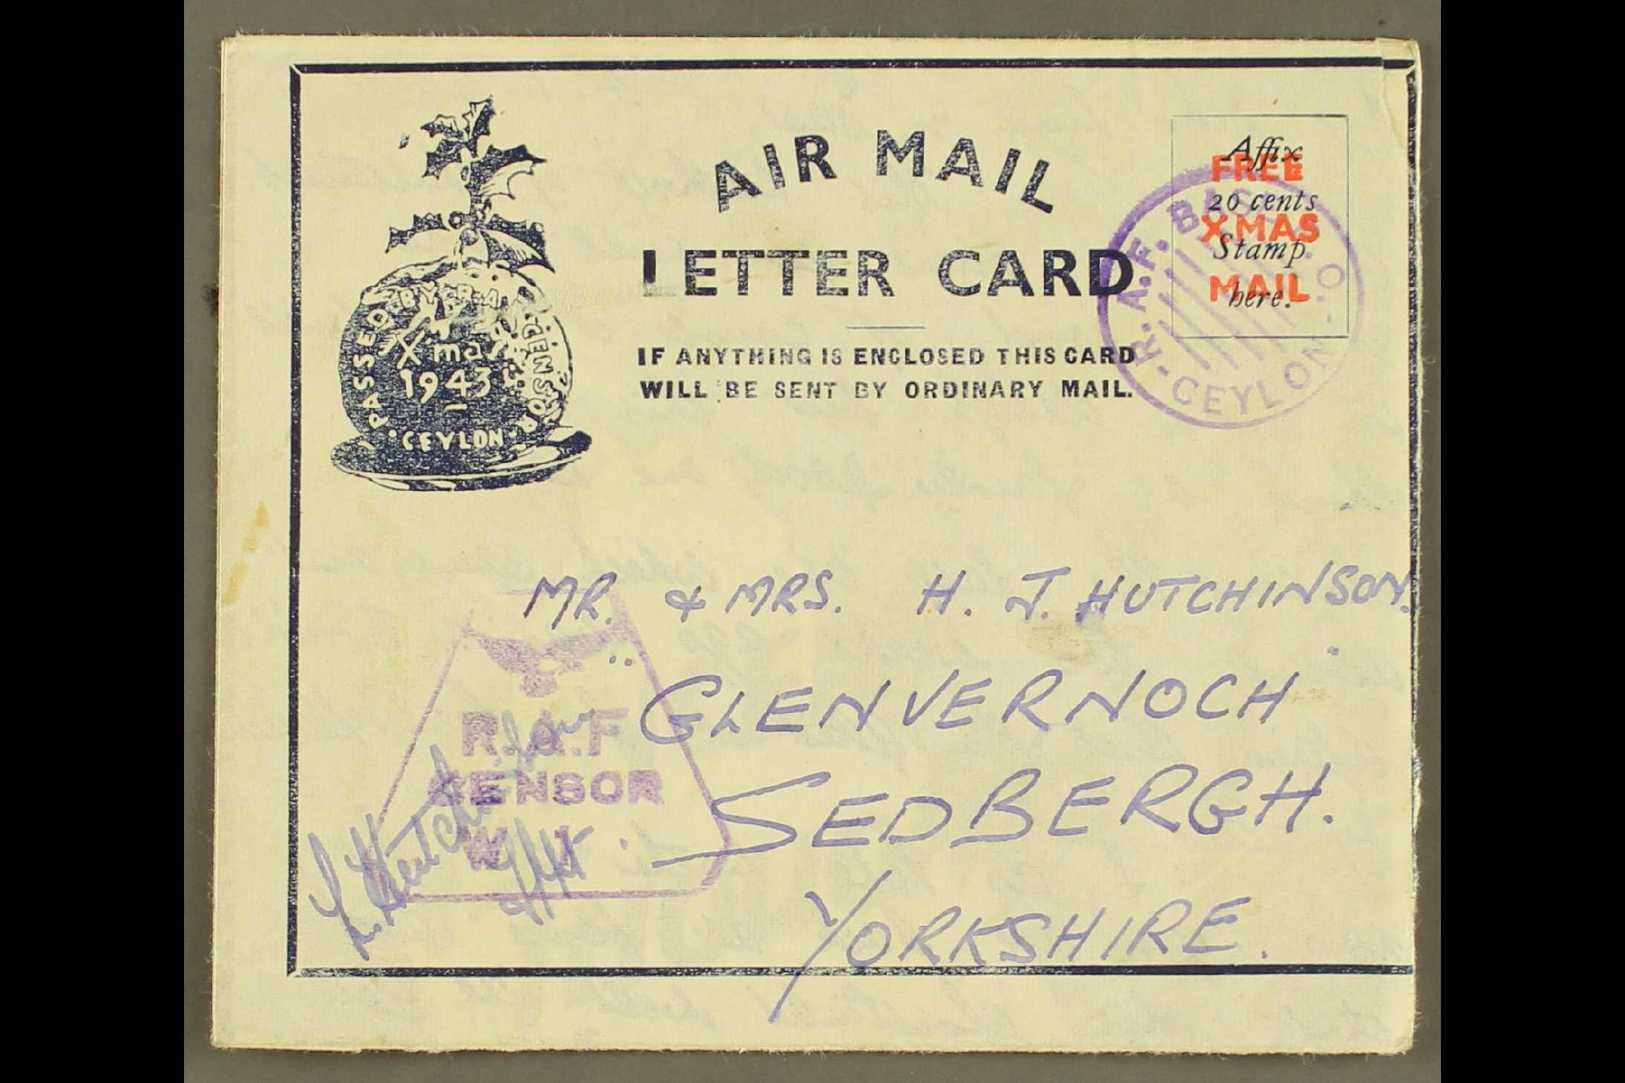 1943 BRITISH MILITARY FORCES CHRISTMAS AEROGRAMME  (Kessler 188) "Affix 20 Cents Stamp Here" From An Airman At R.A.F. Ce - Ceylan (...-1947)